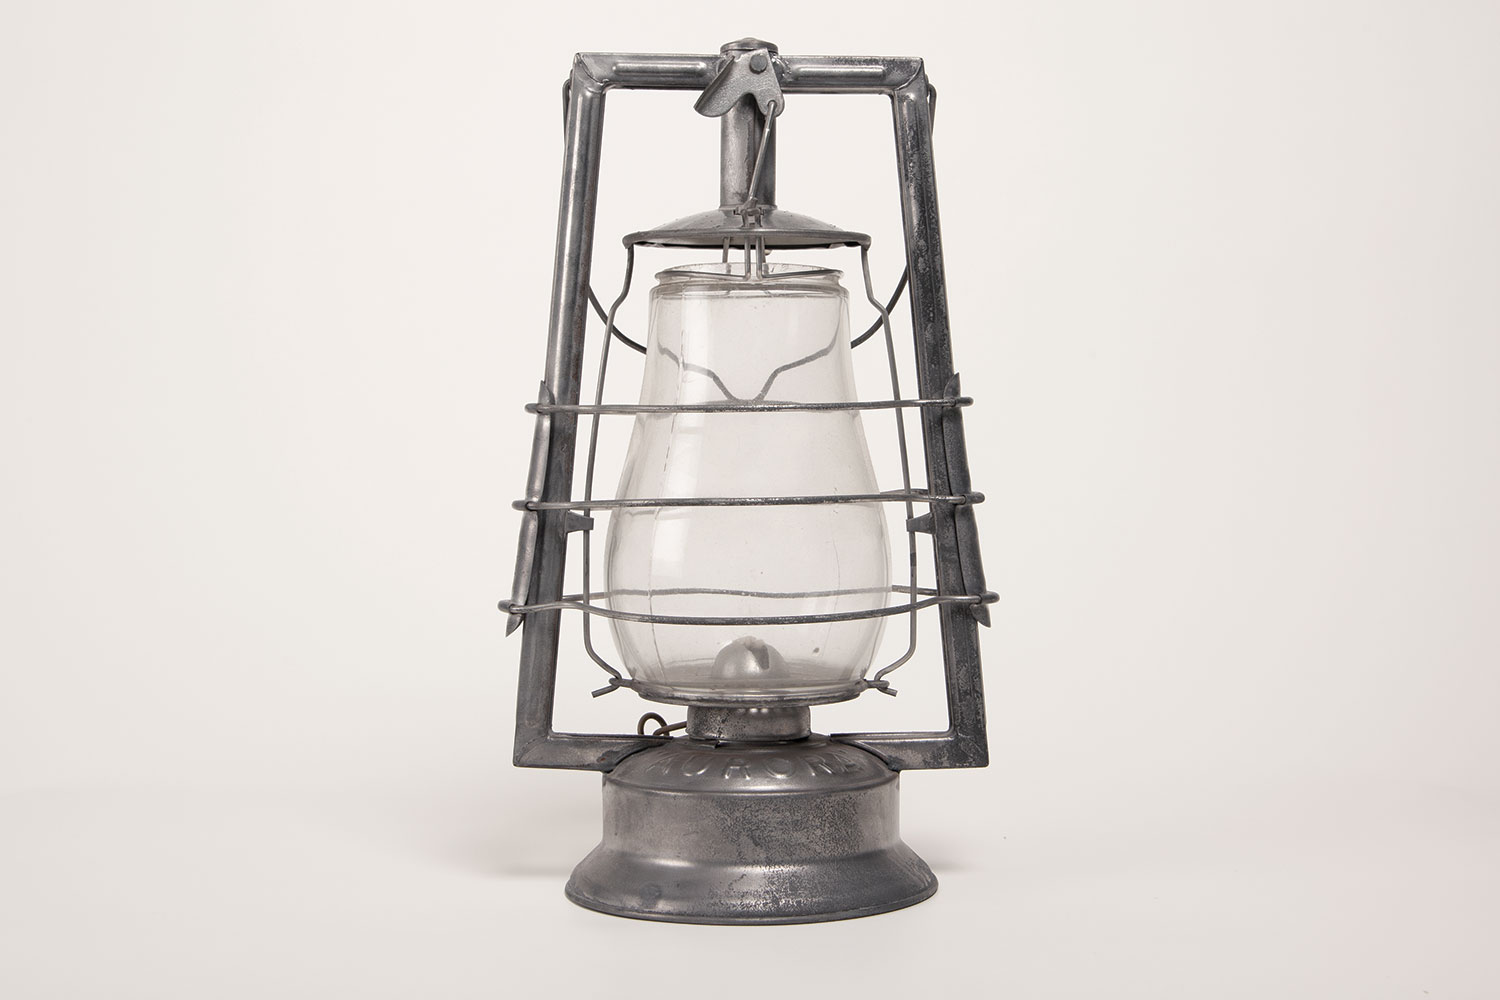 A hurricane lantern, from the 1940s.